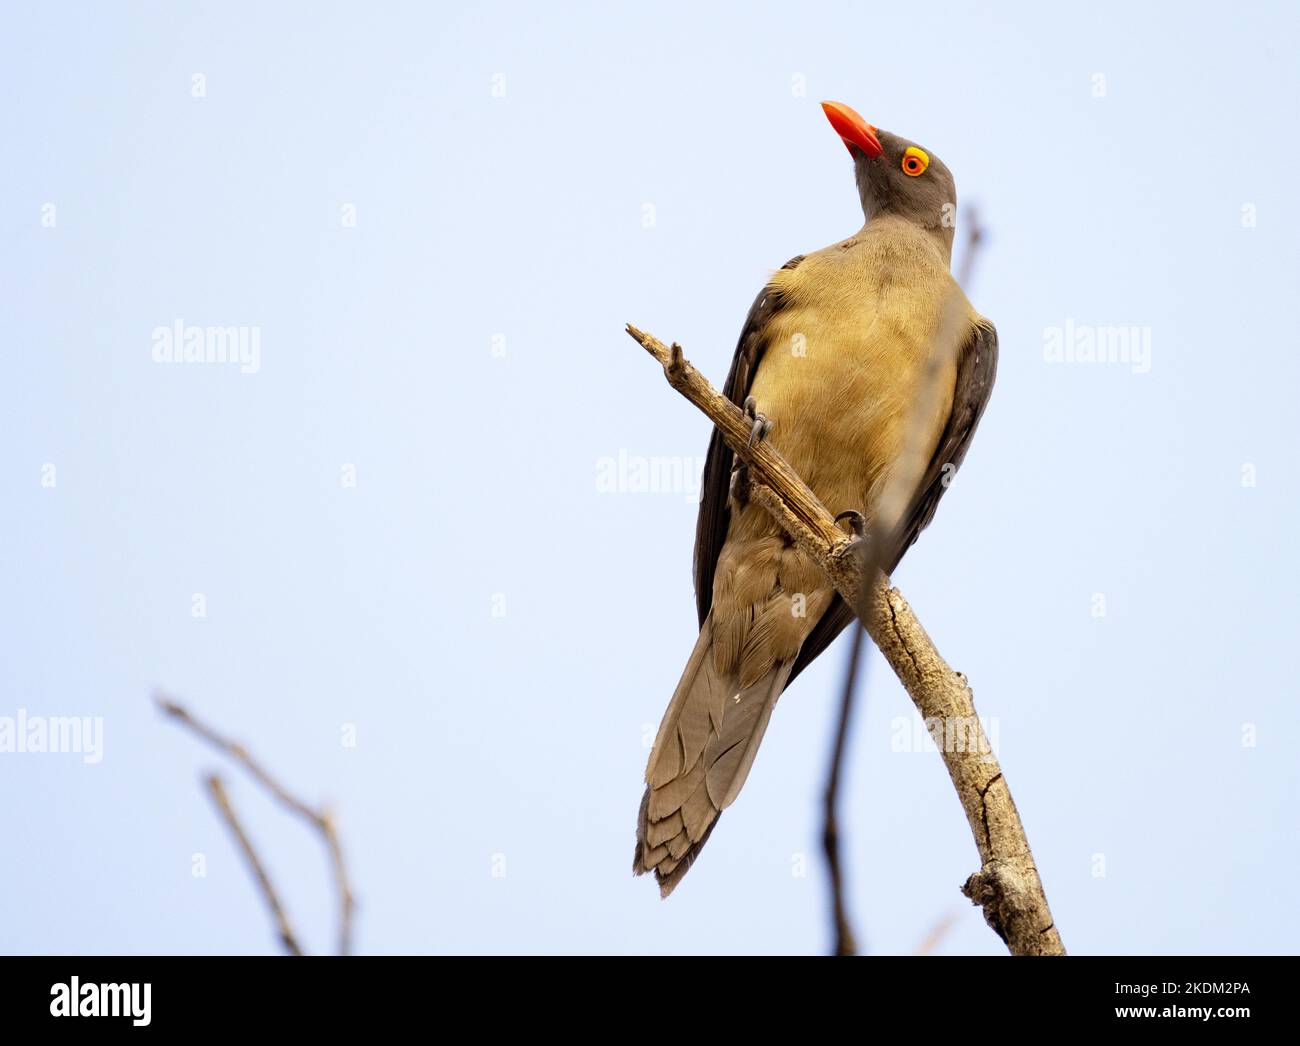 Red Billed Oxpecker , Buphagus erythrorhynchus, perched on a tree, Botswana Africa. Africa birds Stock Photo